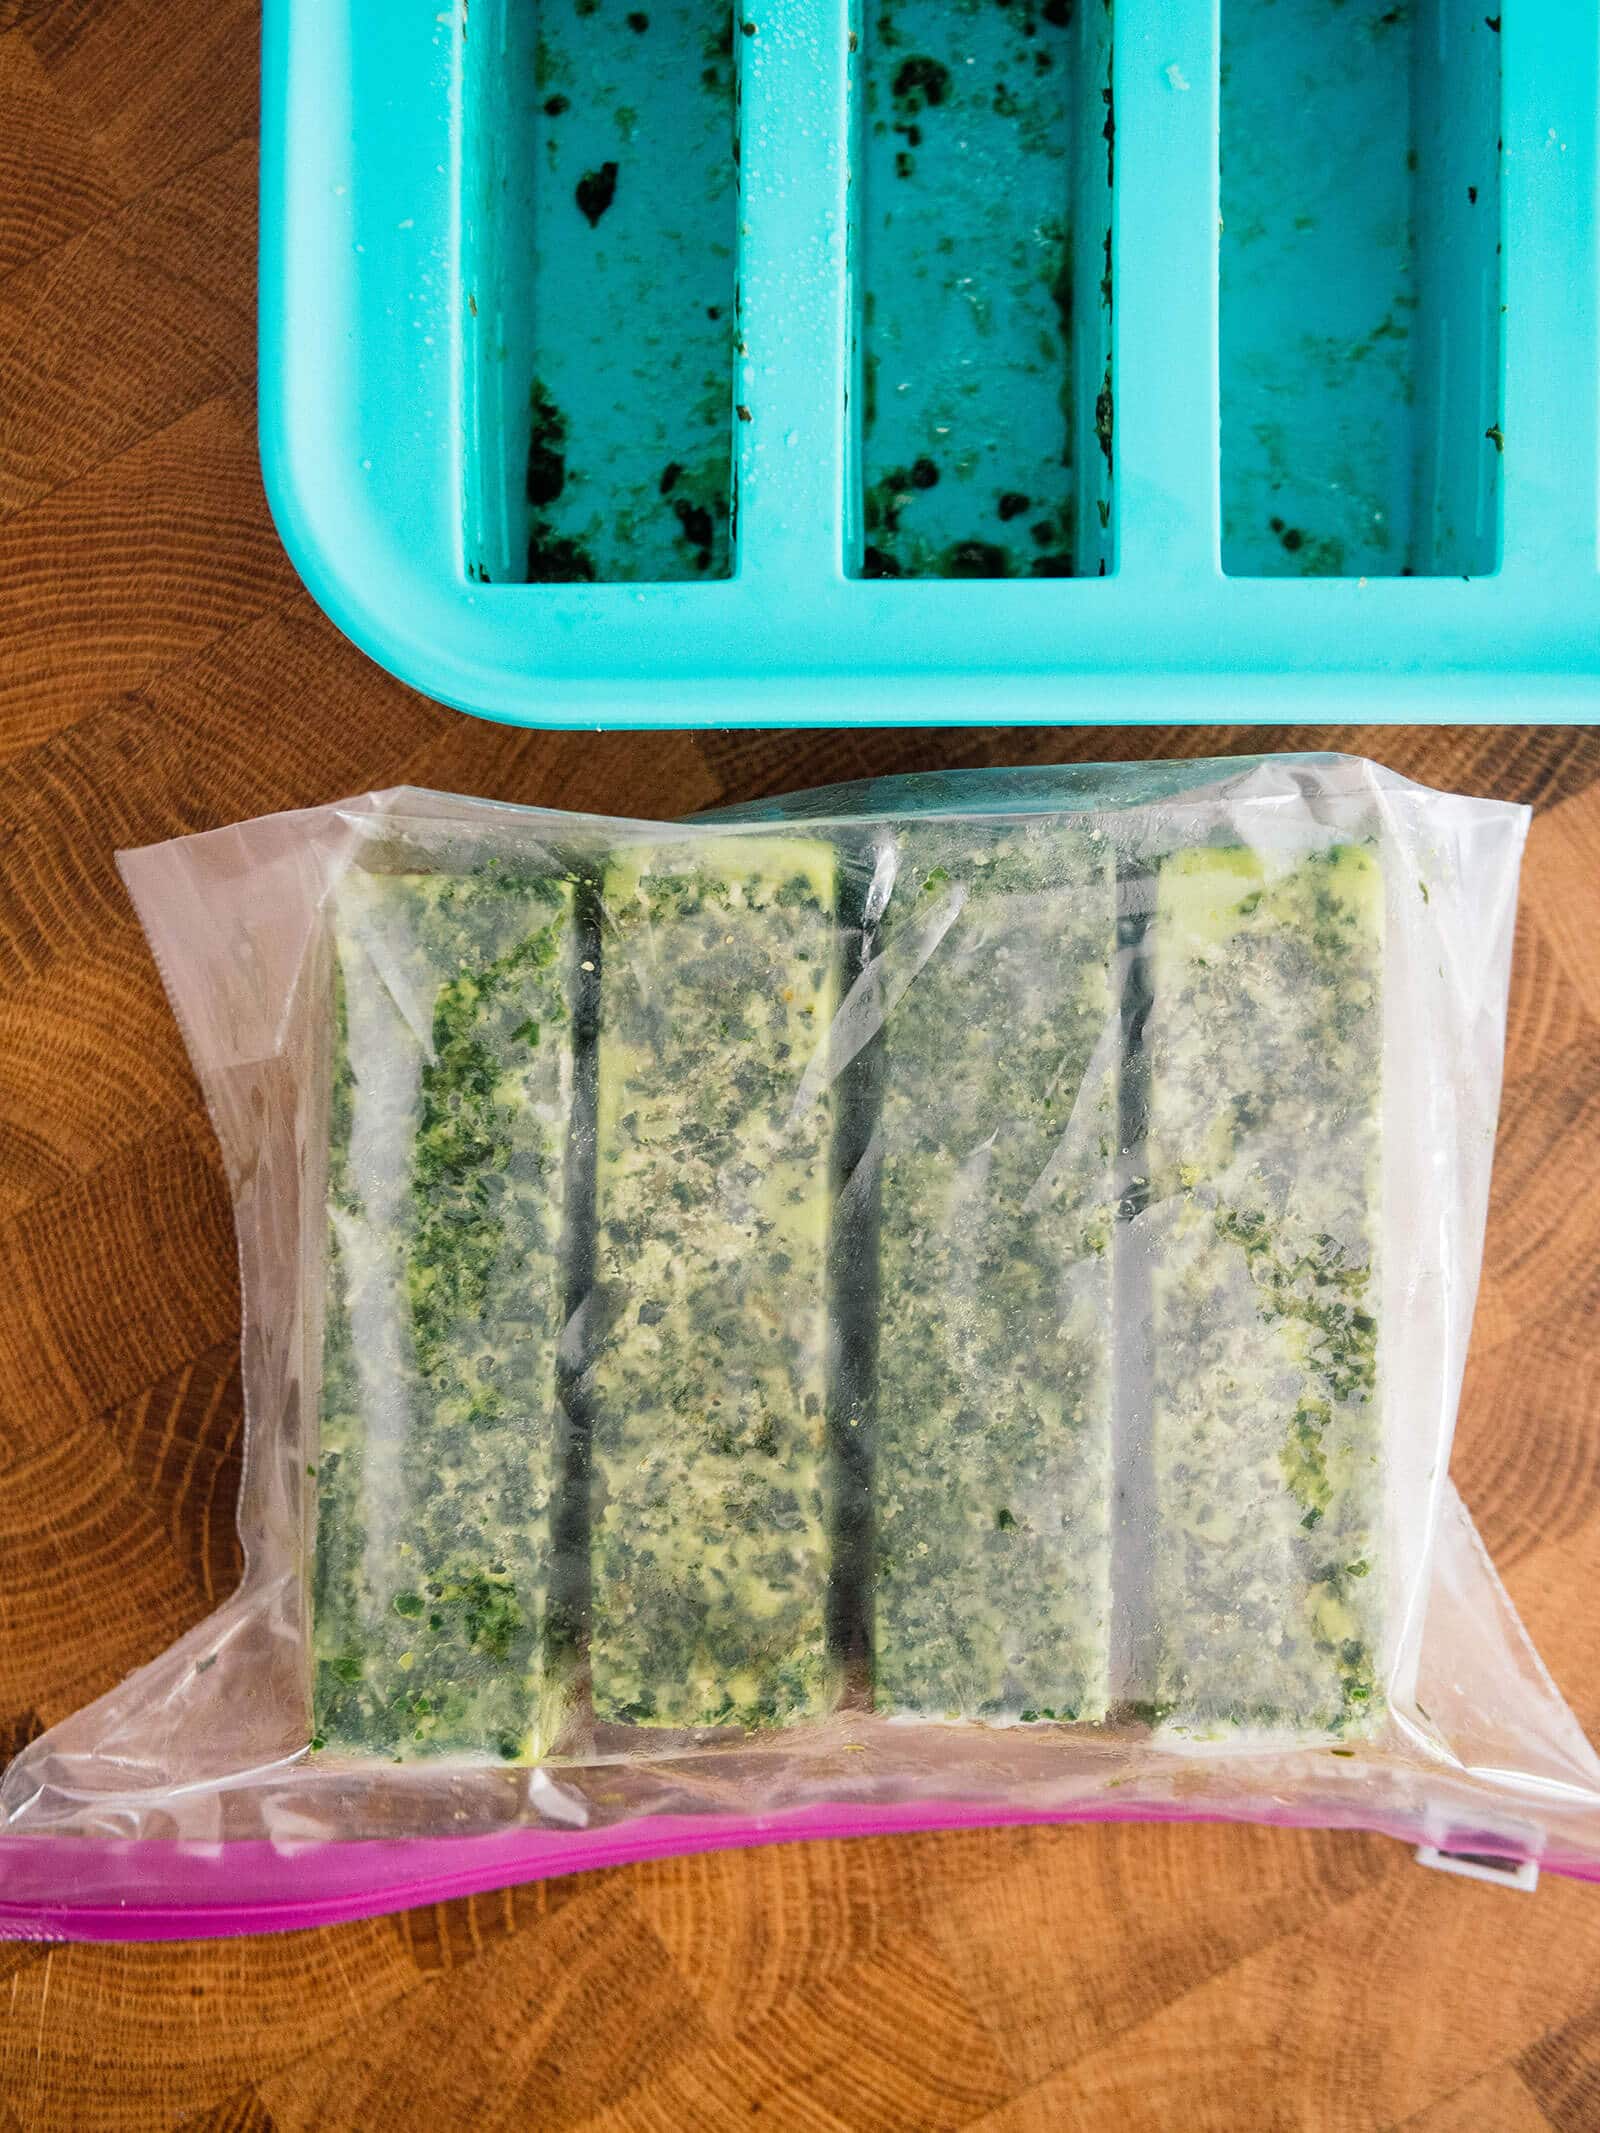 Frozen pesto bars stored in a freezer bag next to an empty ice cube tray